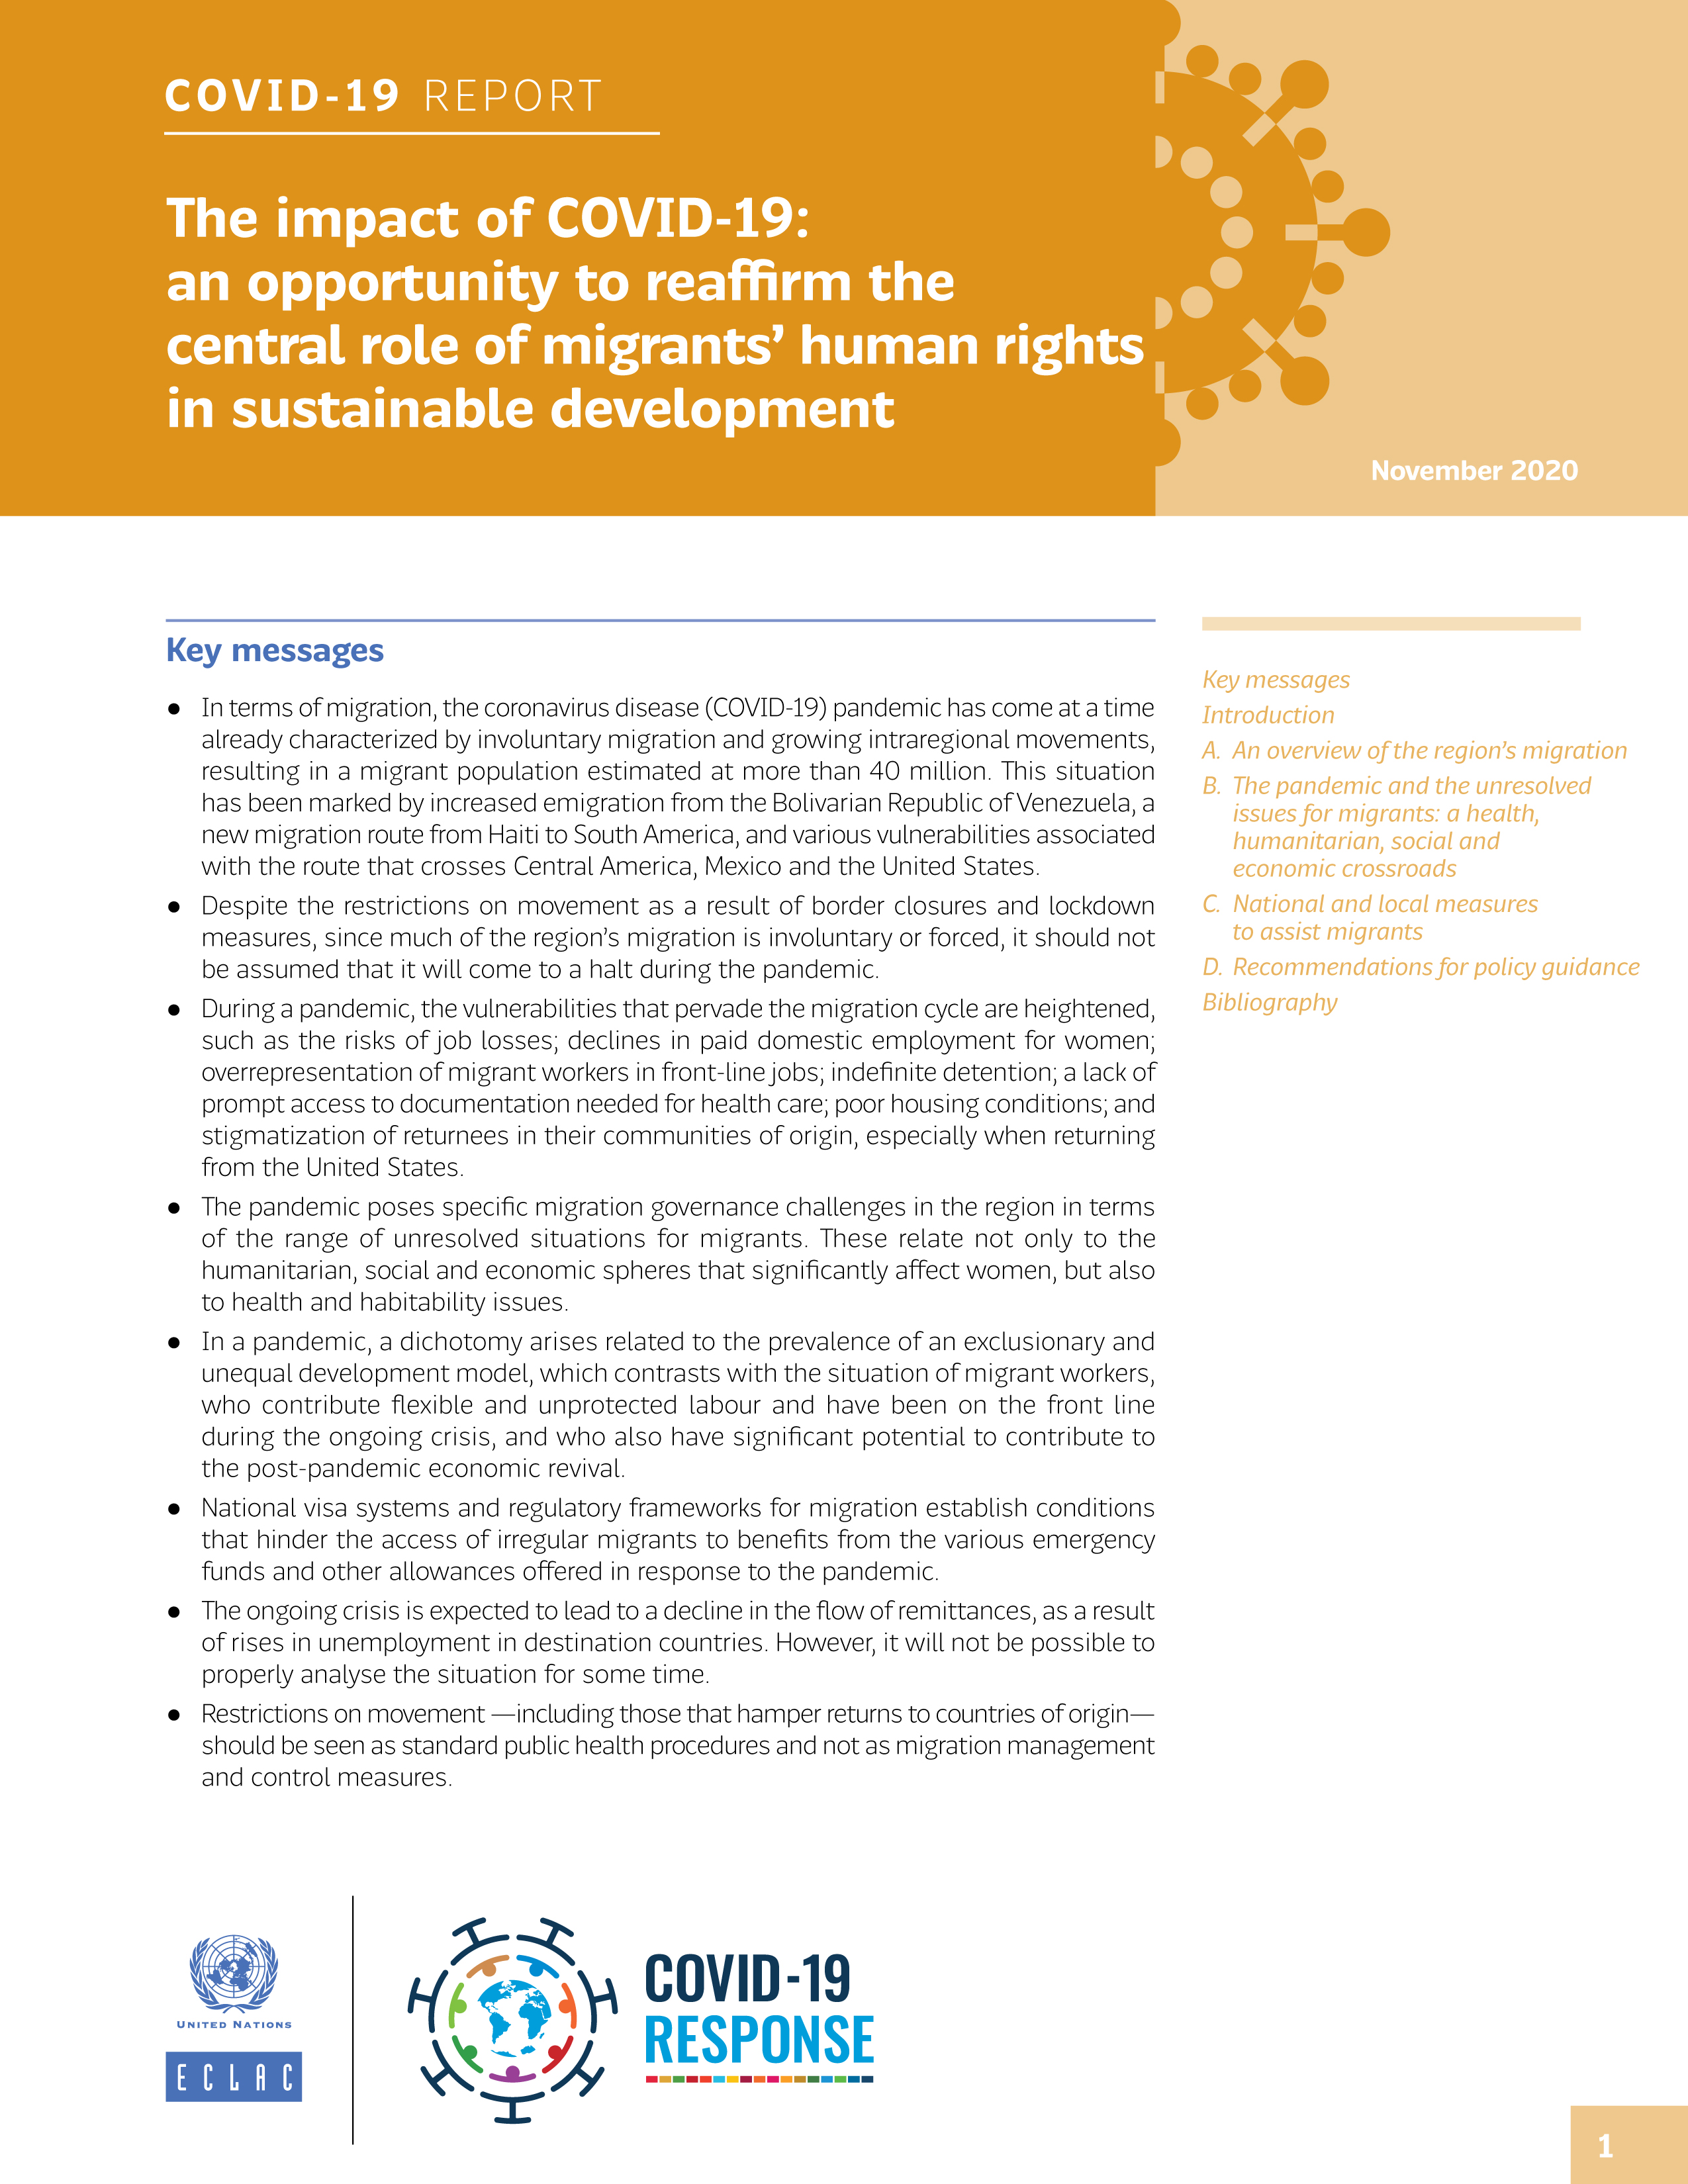 image of The Impact of COVID-19: An Opportunity to Reaffirm the Central Role of Migrants’ Human Rights in Sustainable Development